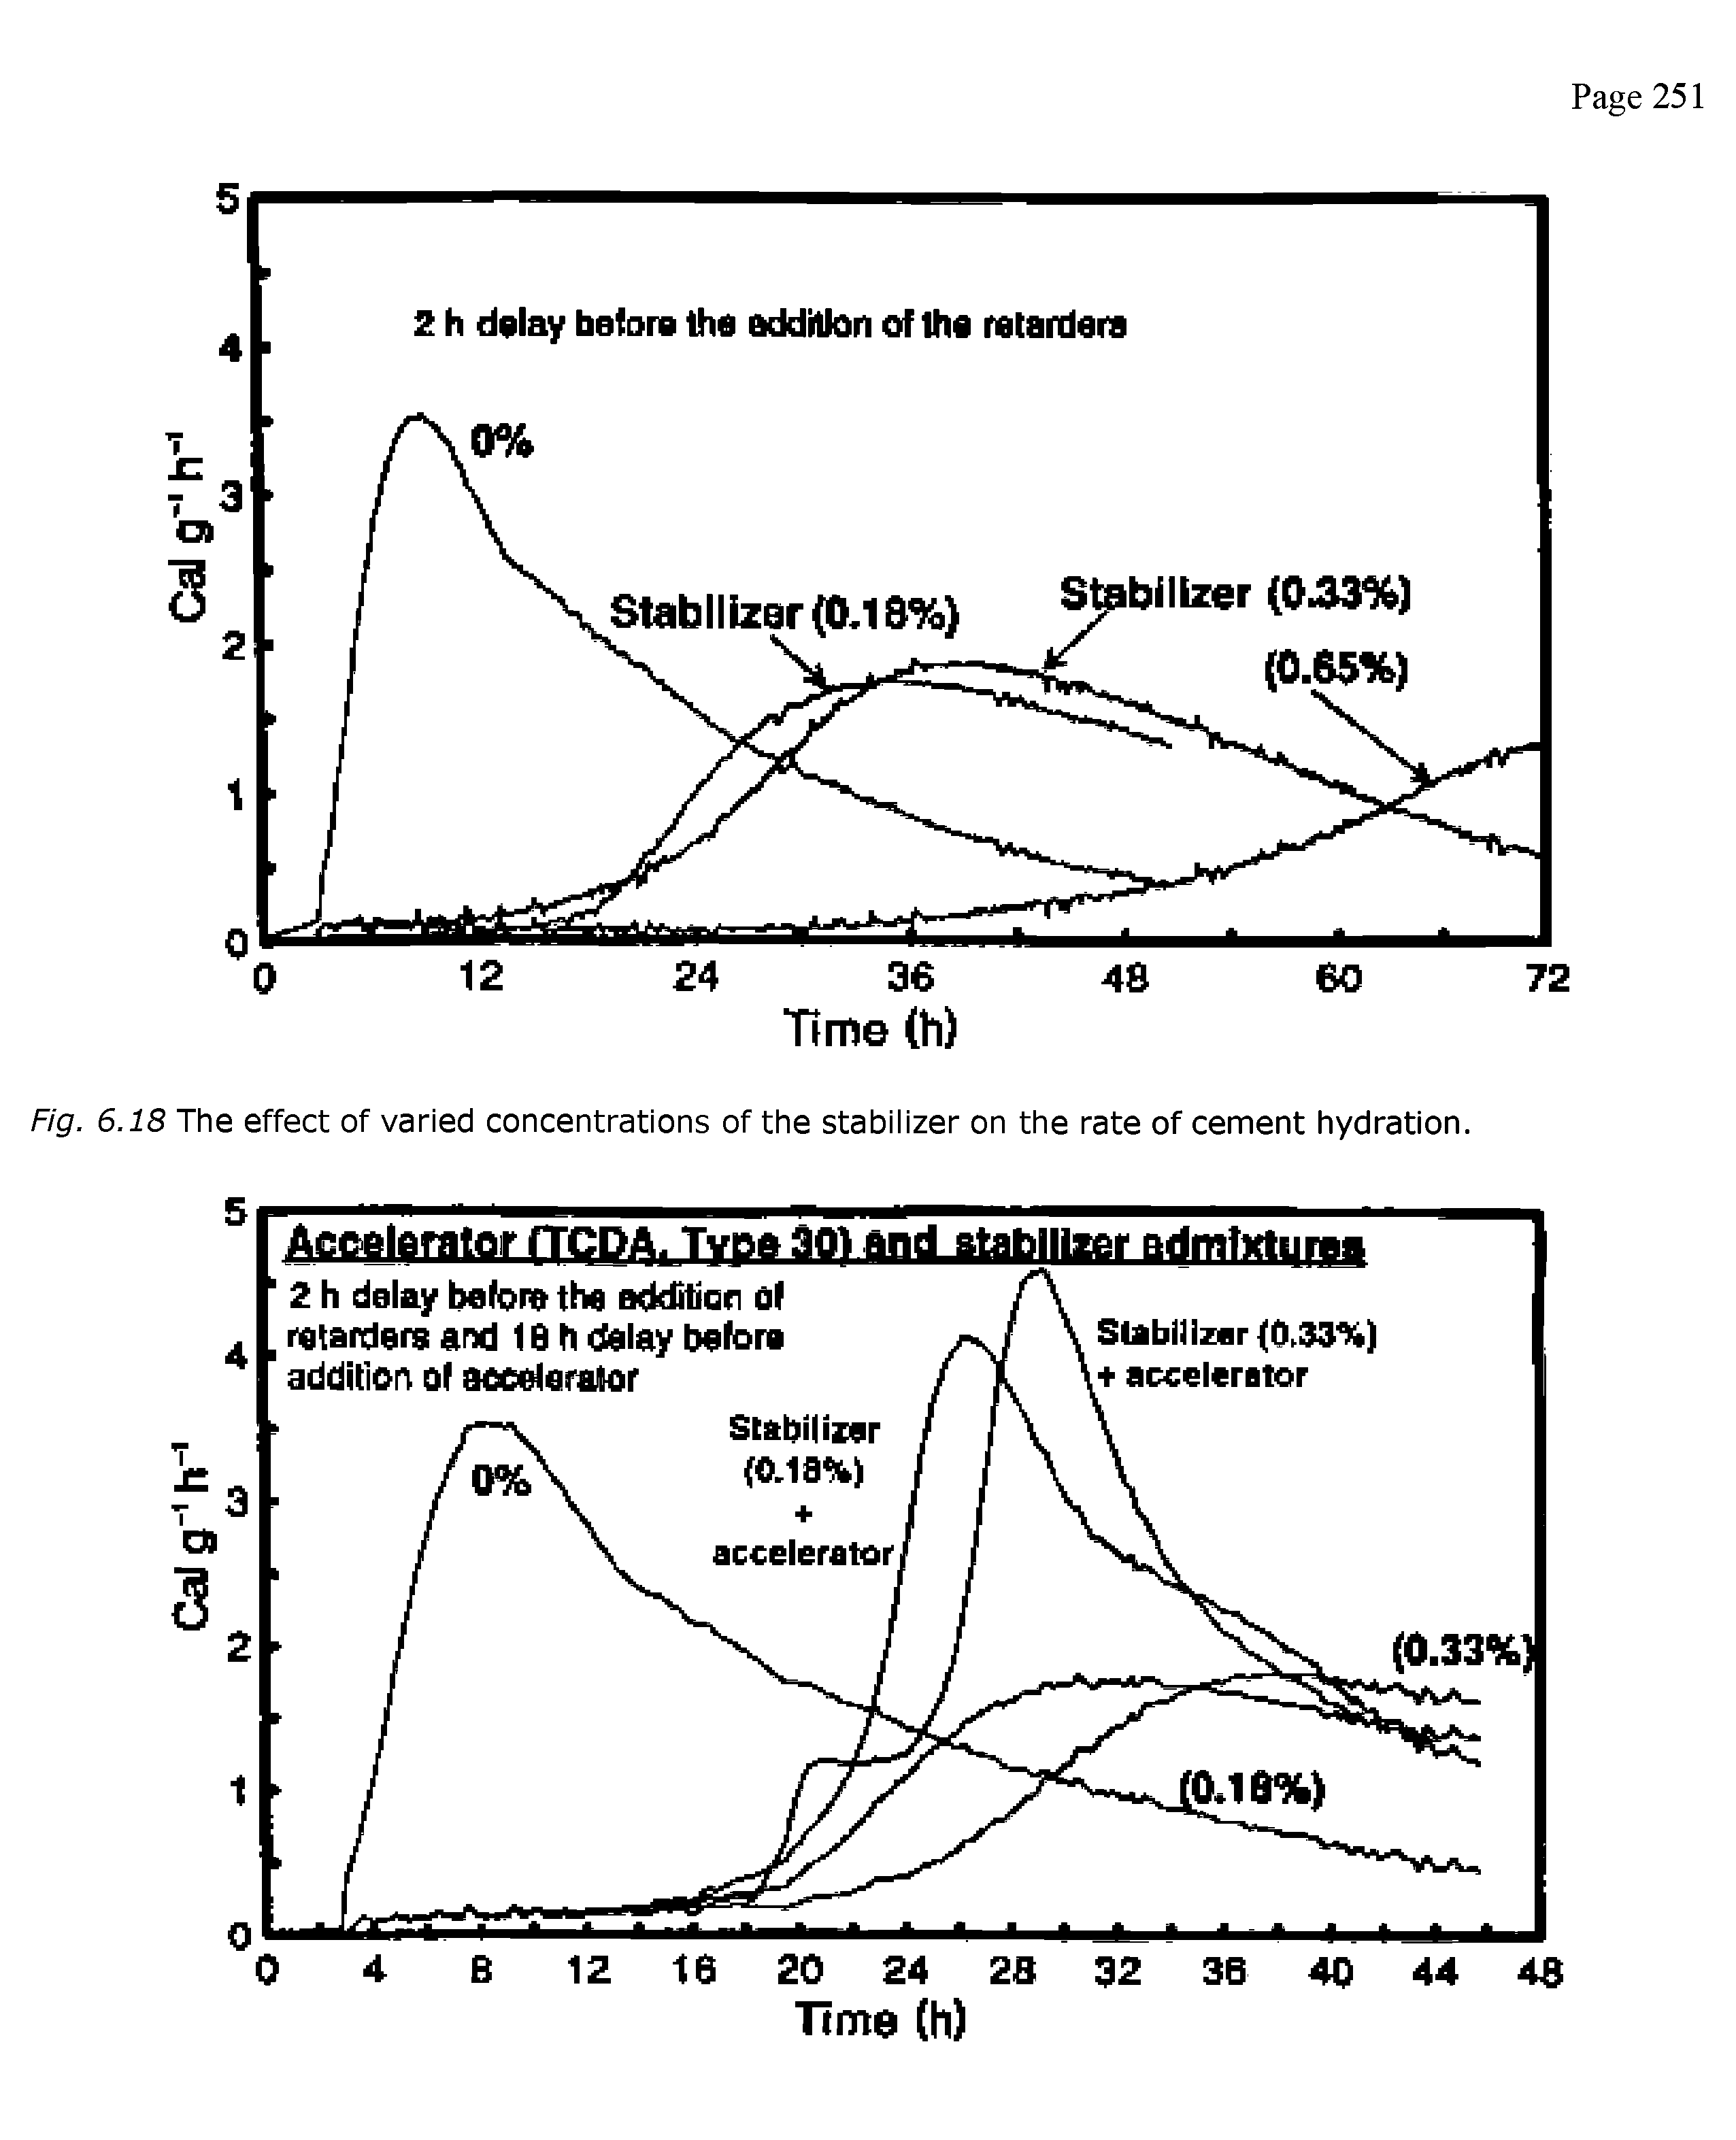 Fig. 6.18 The effect of varied concentrations of the stabiiizer on the rate of cement hydration.